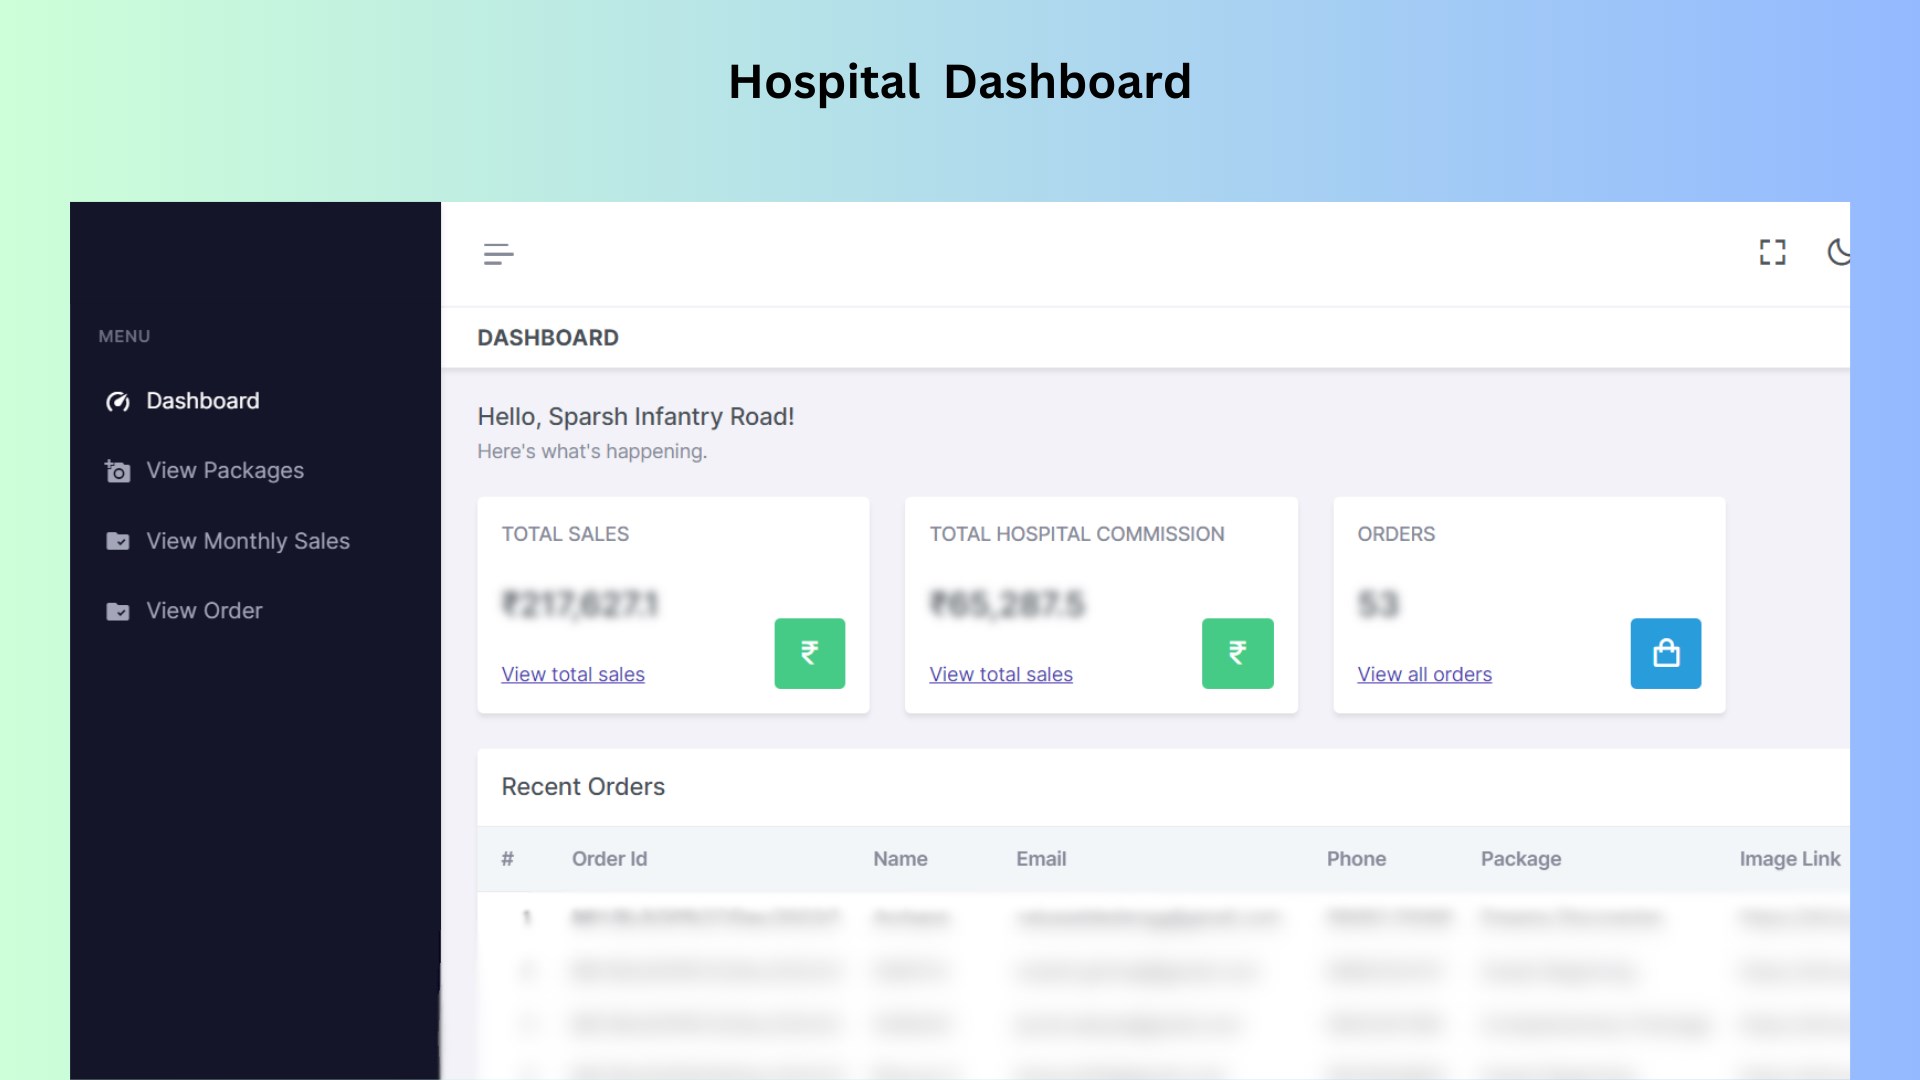 Exclusive hospital dashboard with a feature to track orders created within their facility and view revenue generated as commission.